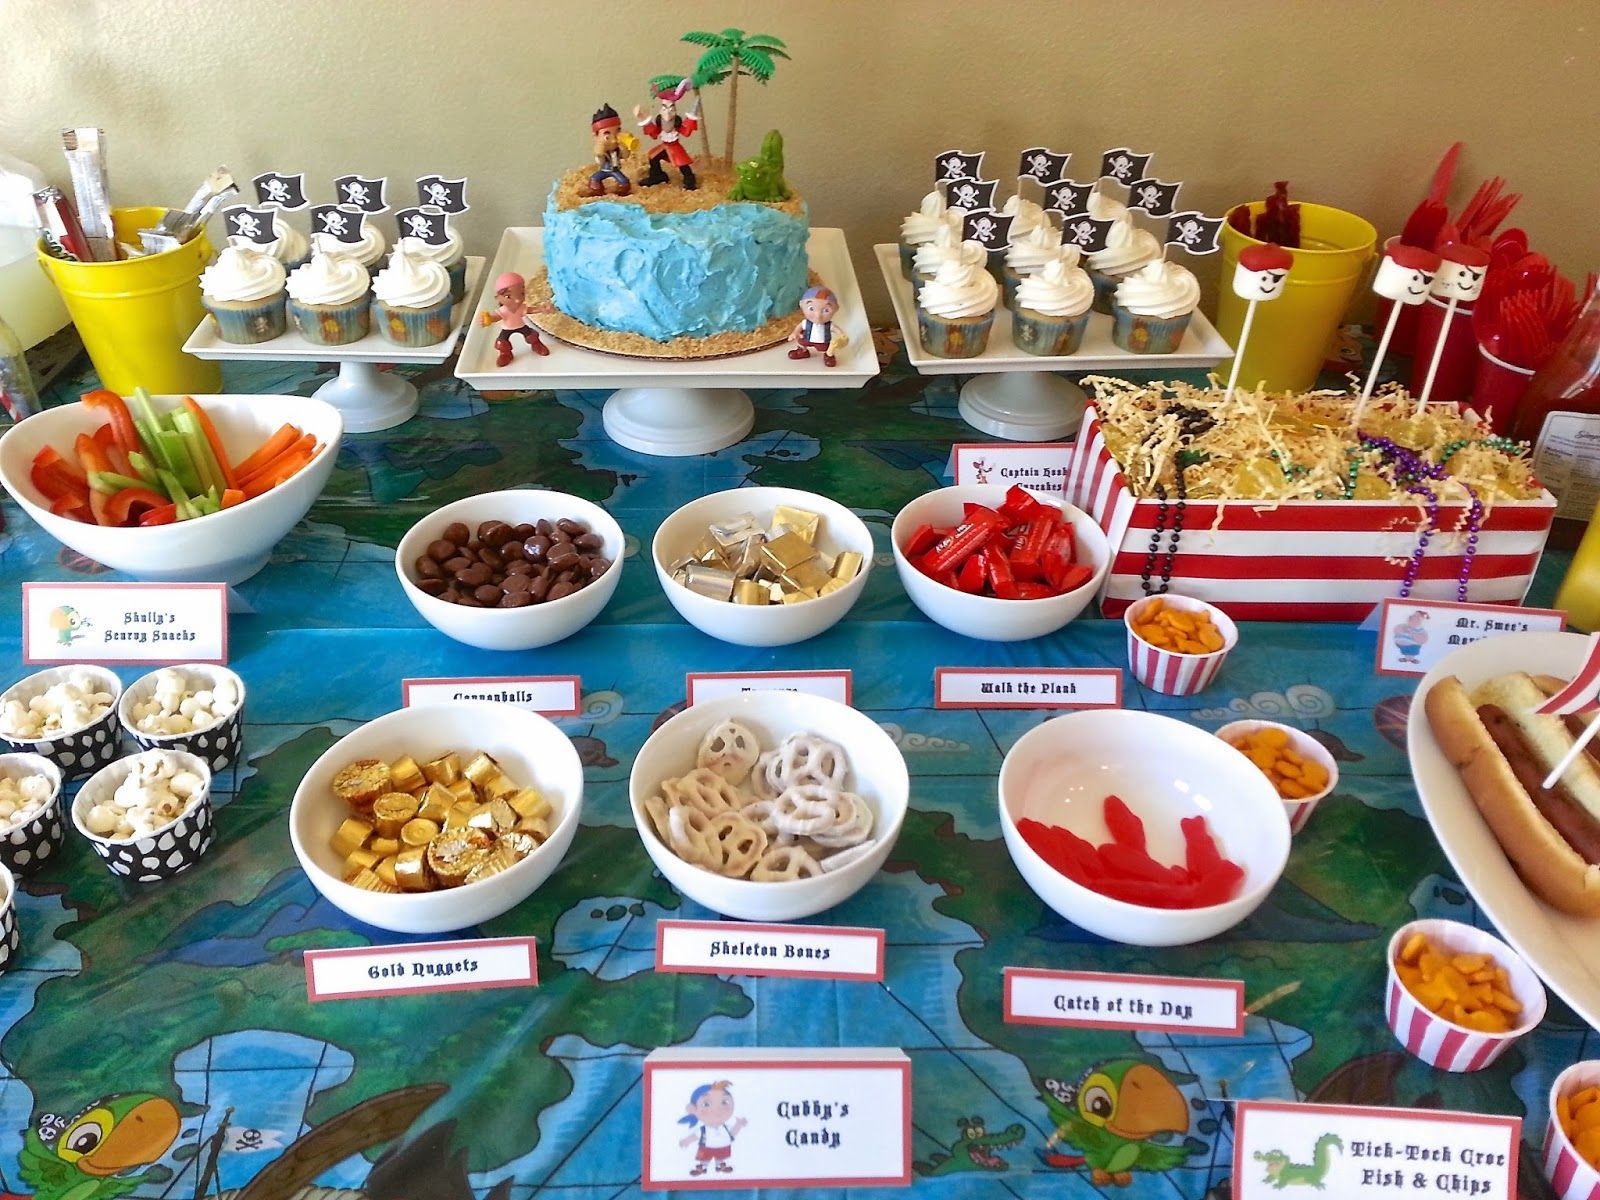 Much Kneaded: Jake and the Neverland Pirates Birthday Party